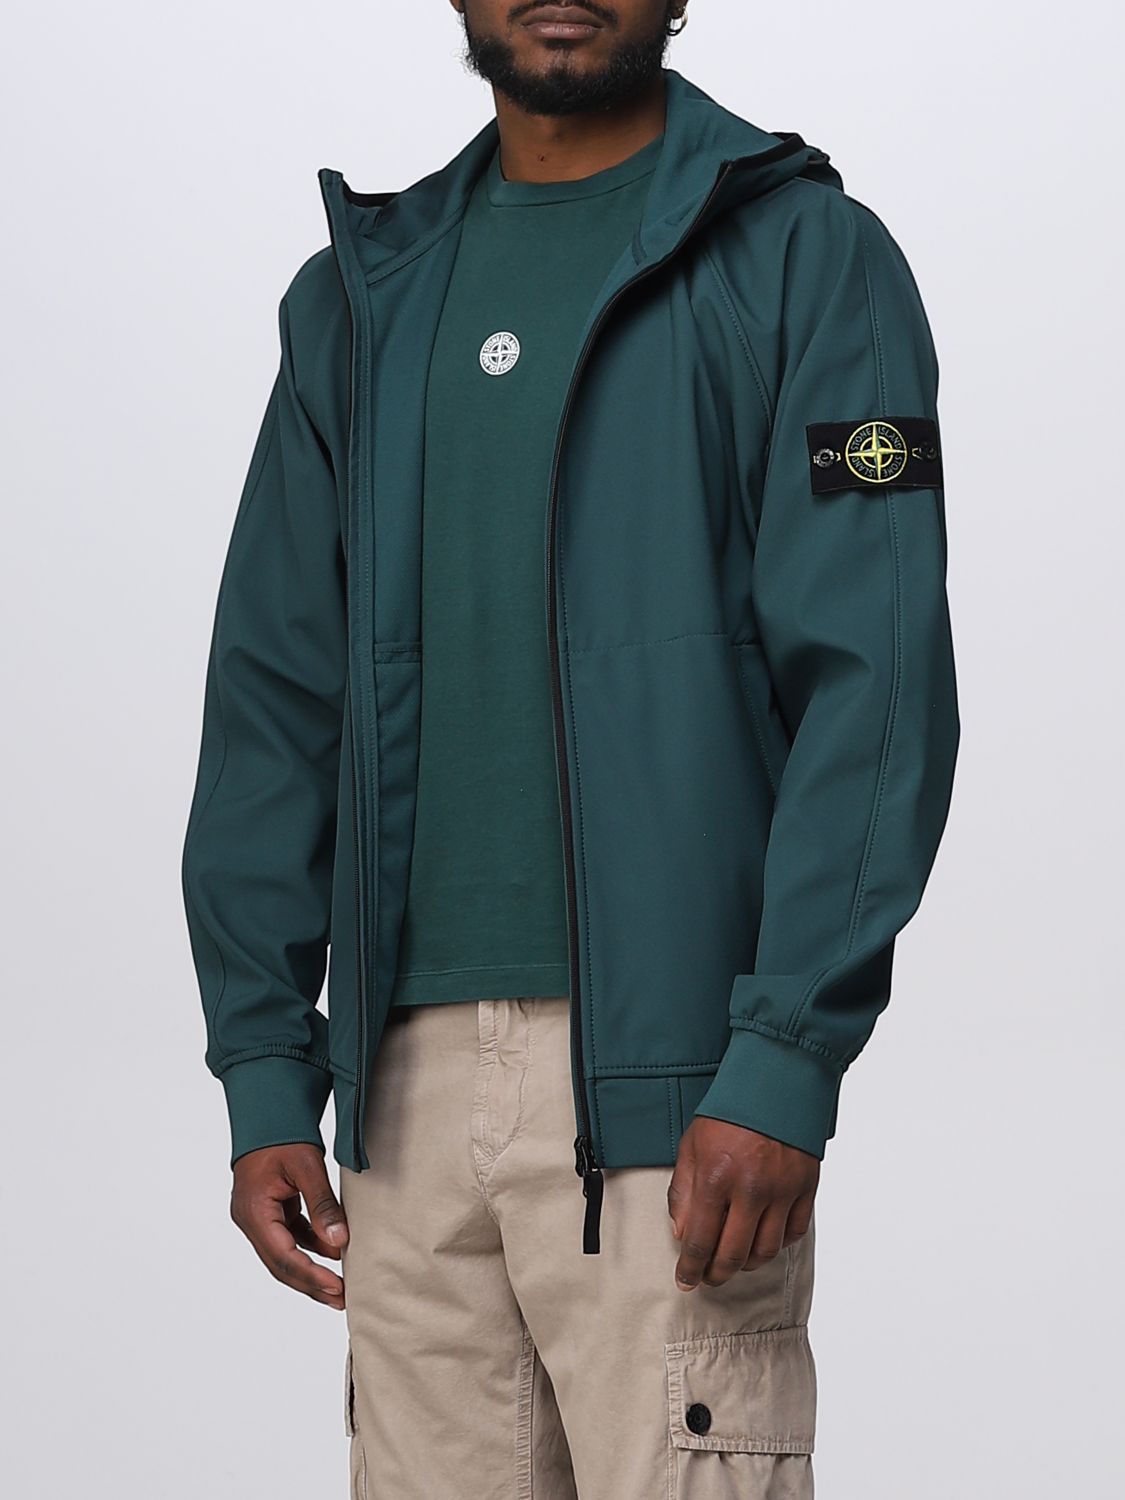 Quilt Rarity latch STONE ISLAND: jacket for man - Green | Stone Island jacket 781540927 online  on GIGLIO.COM